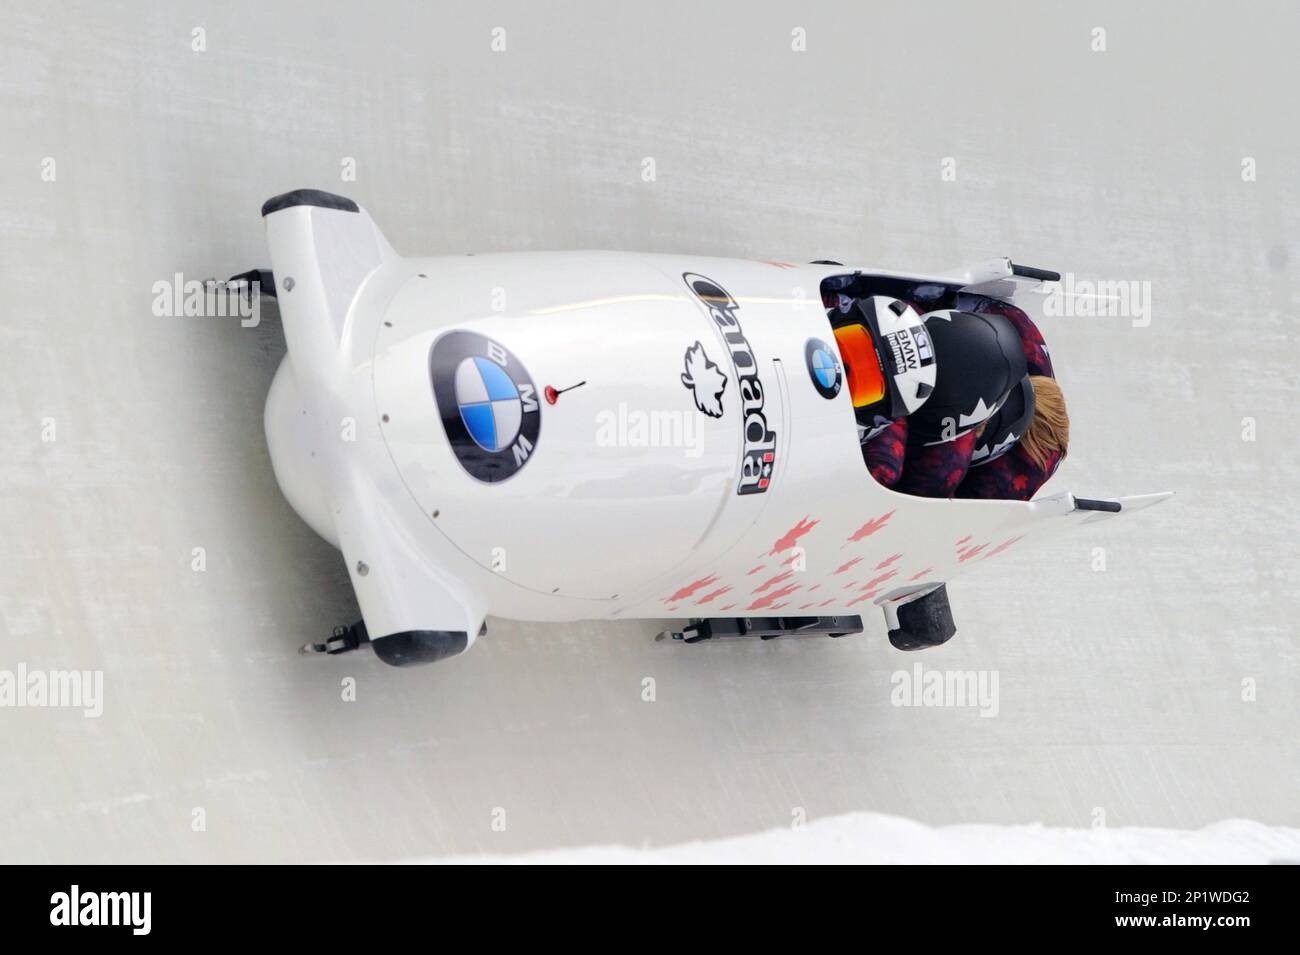 09 January 2016 The Canada 3 4-man bobsled driven by Kaillie Humphries slides on the track at the Olympic Sports Complex in Lake Placid, NY in the IBSF Mens Bobsleigh World Cup